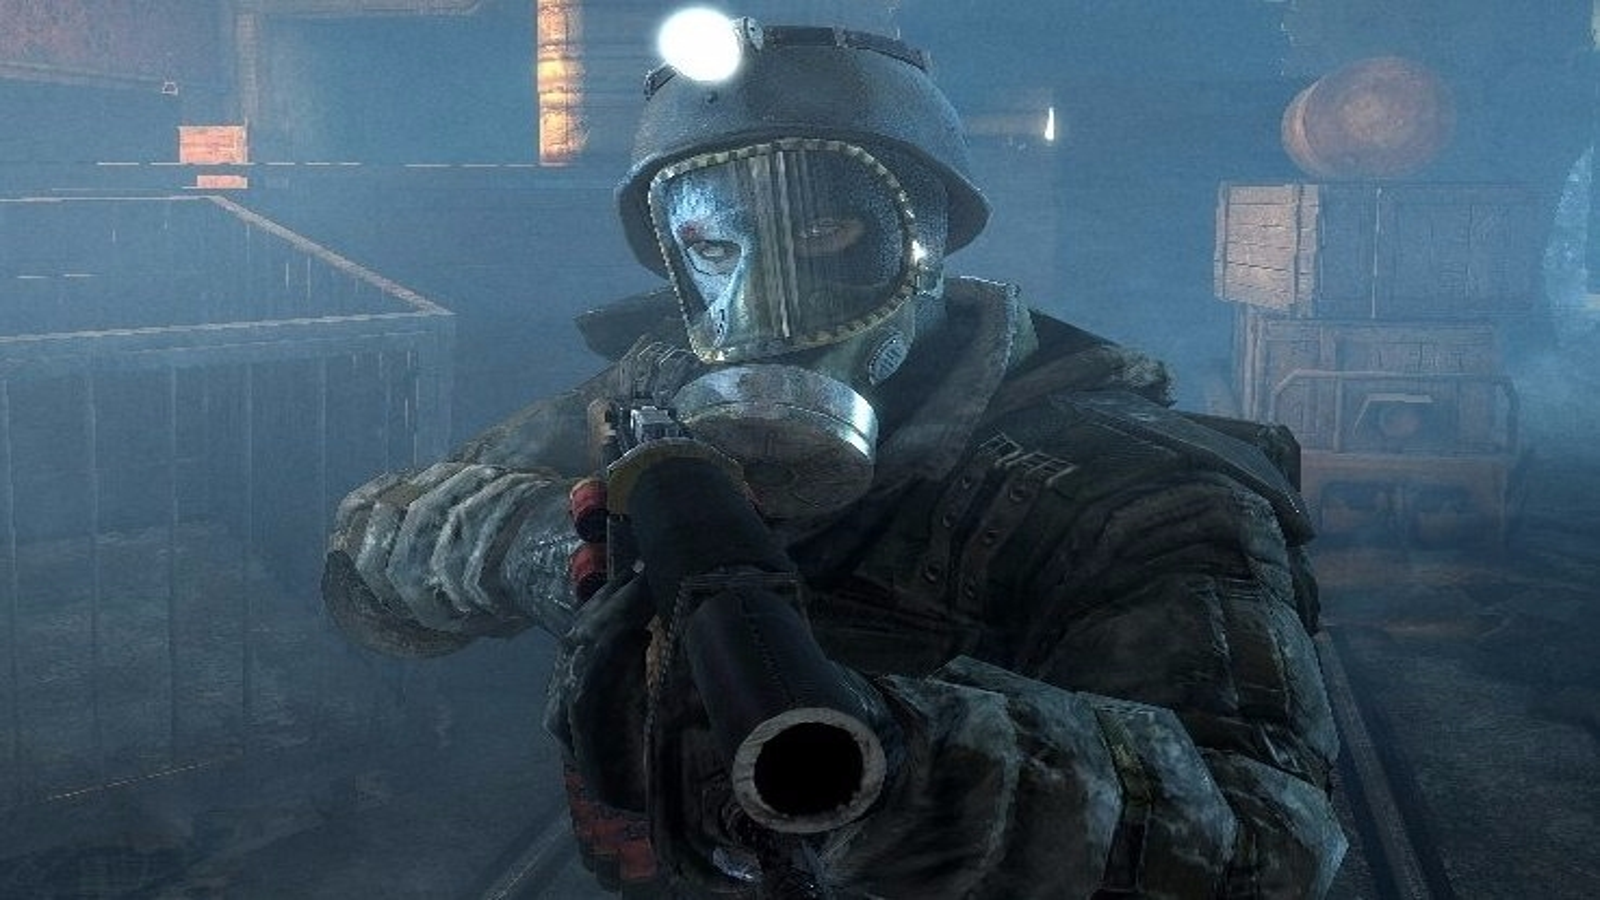 Metro 2033 author partners with Hollywood for film